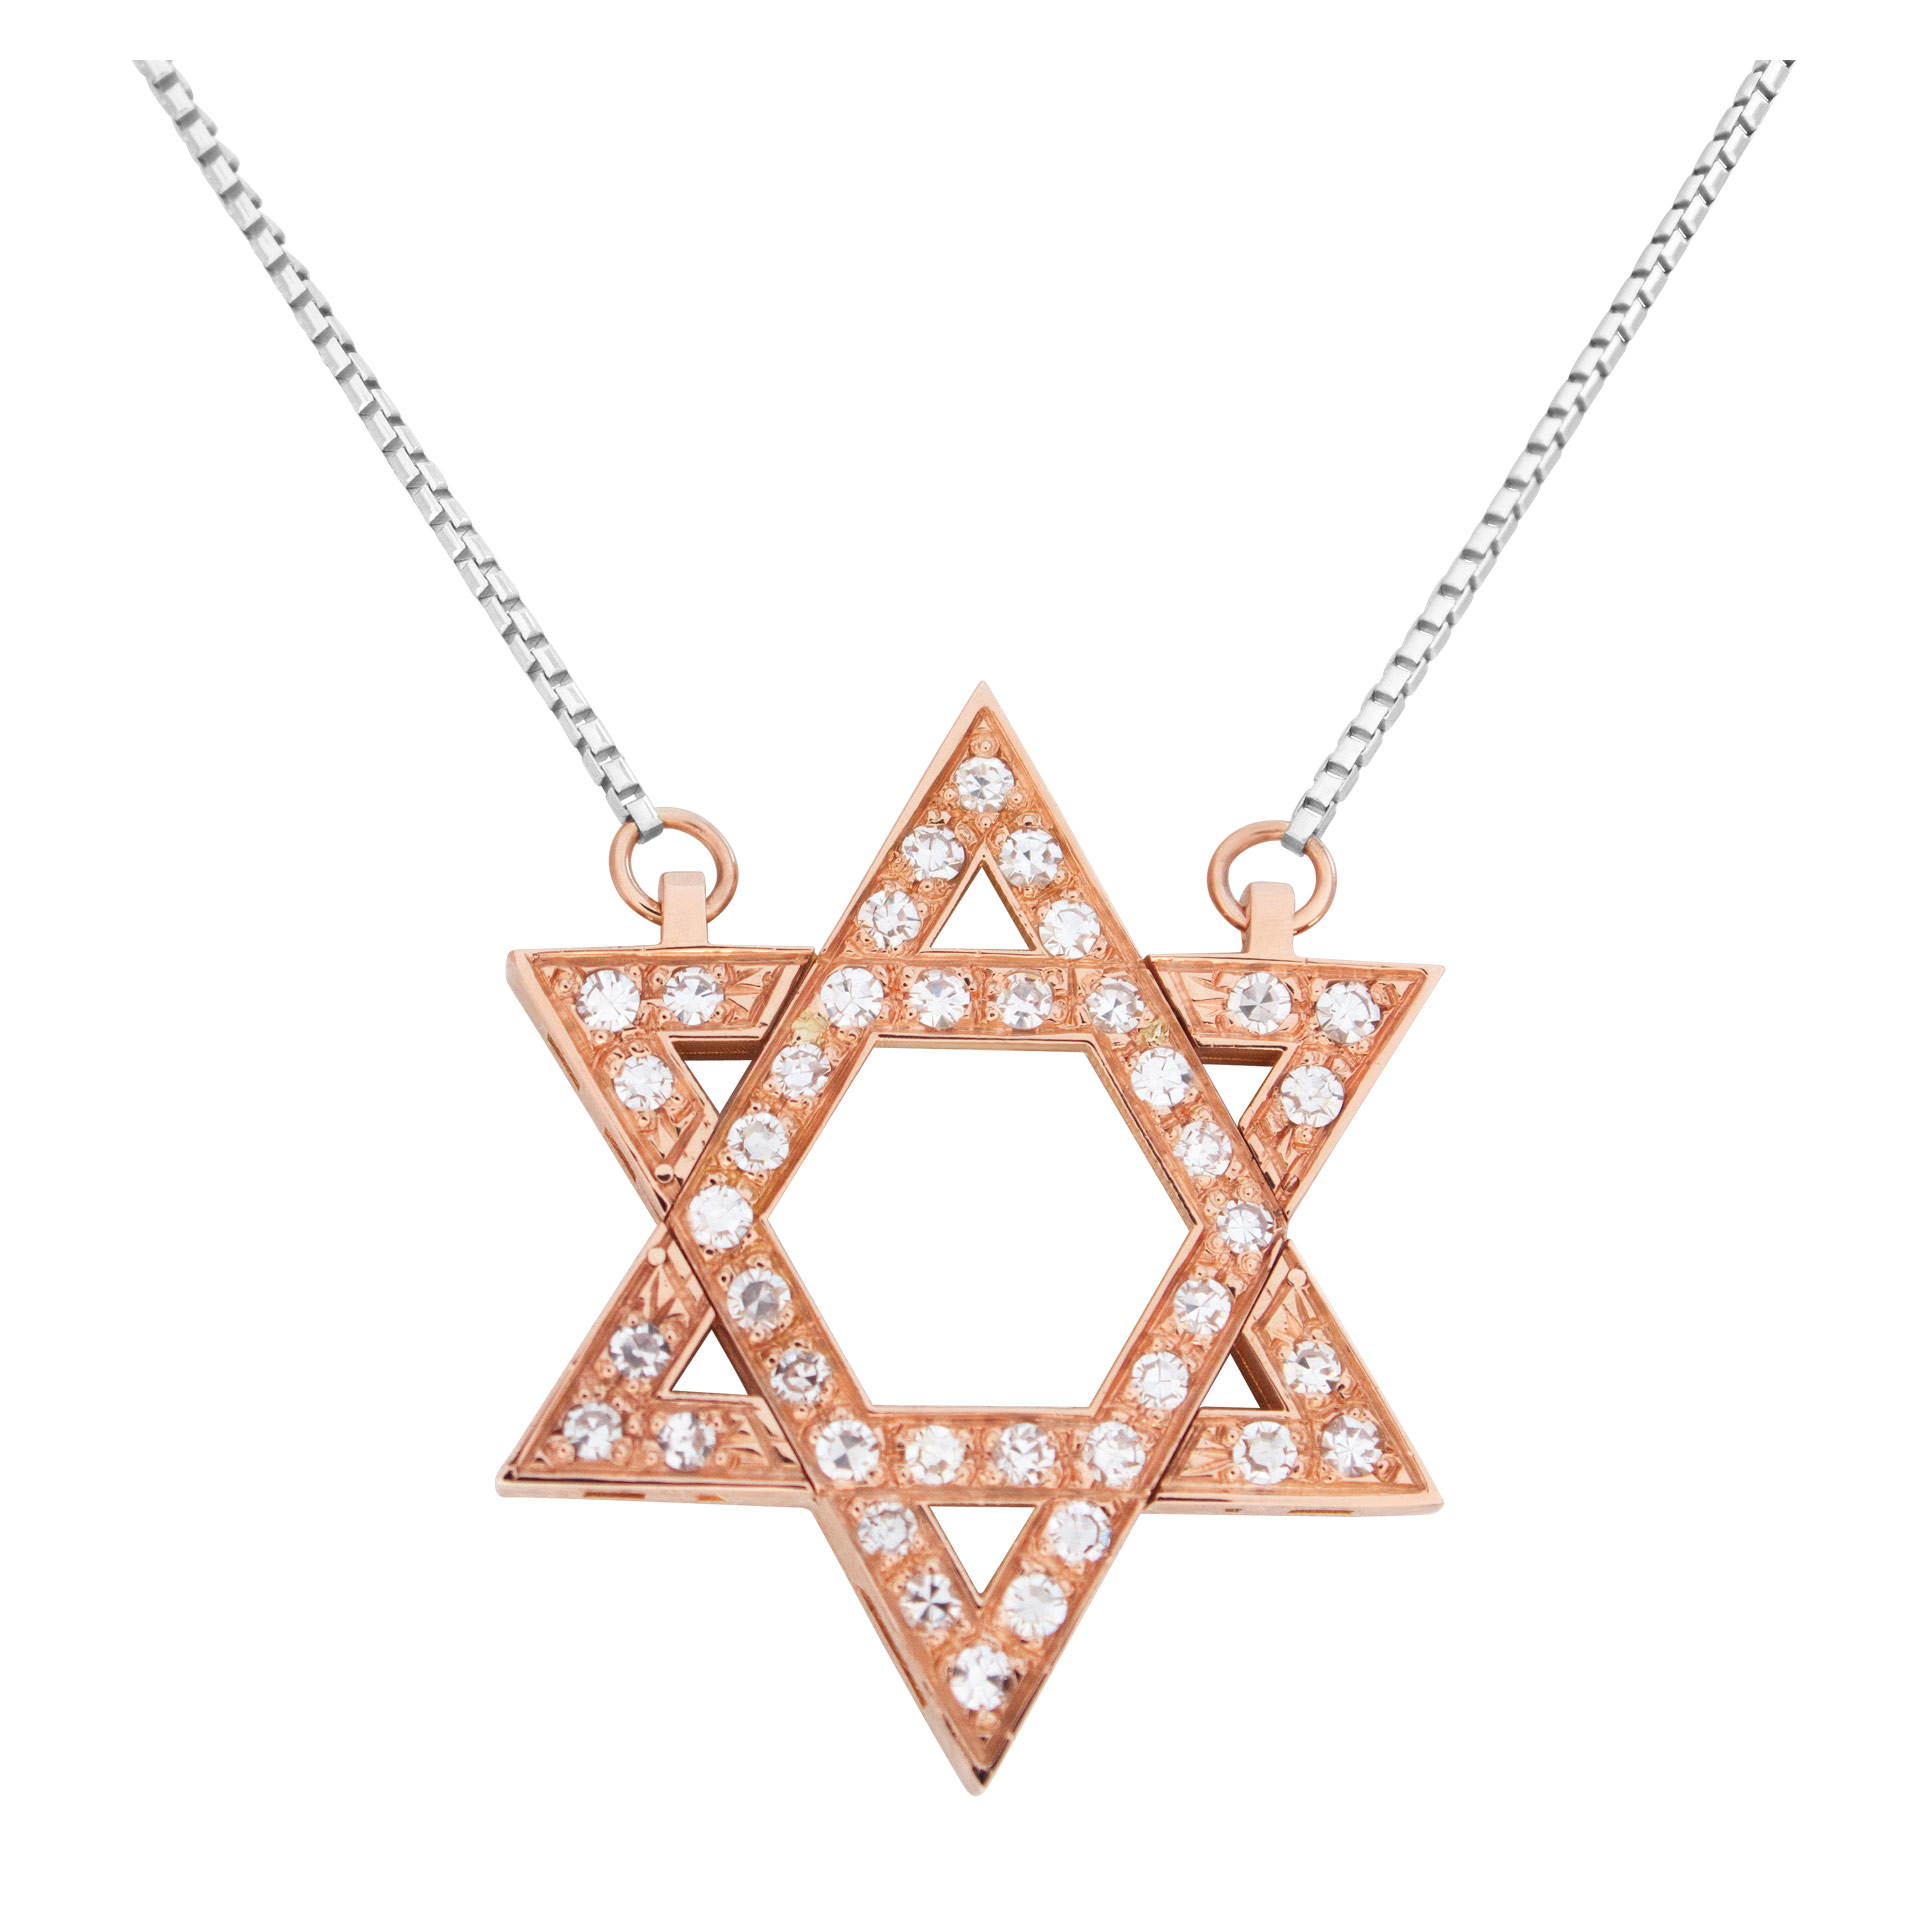 "Star of David" pendant with approximately 0.75 carat pave diamonds set in 18k rose gold with an 18k white gold chain (Stones) image 2